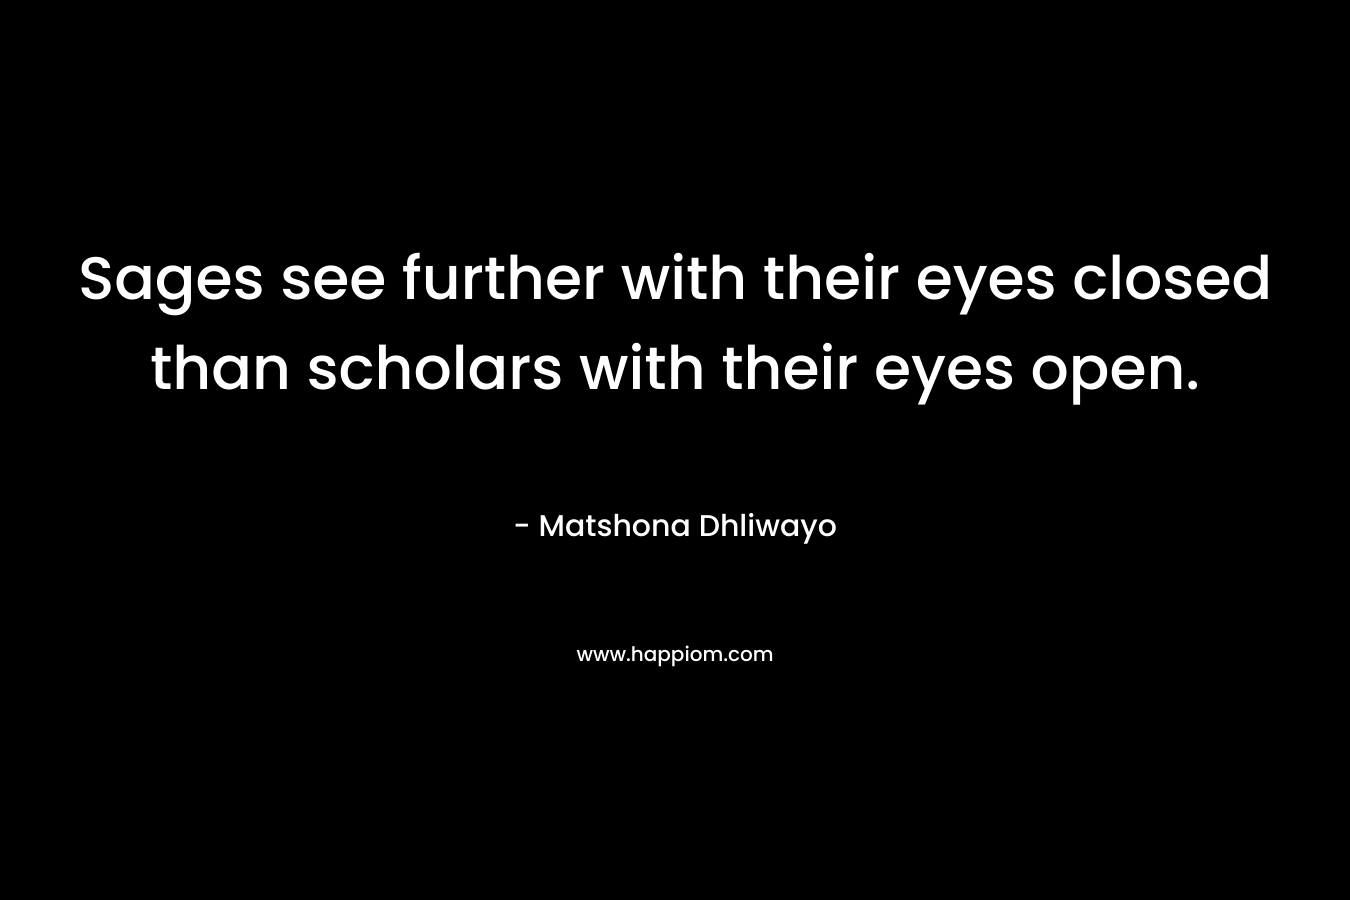 Sages see further with their eyes closed than scholars with their eyes open. – Matshona Dhliwayo